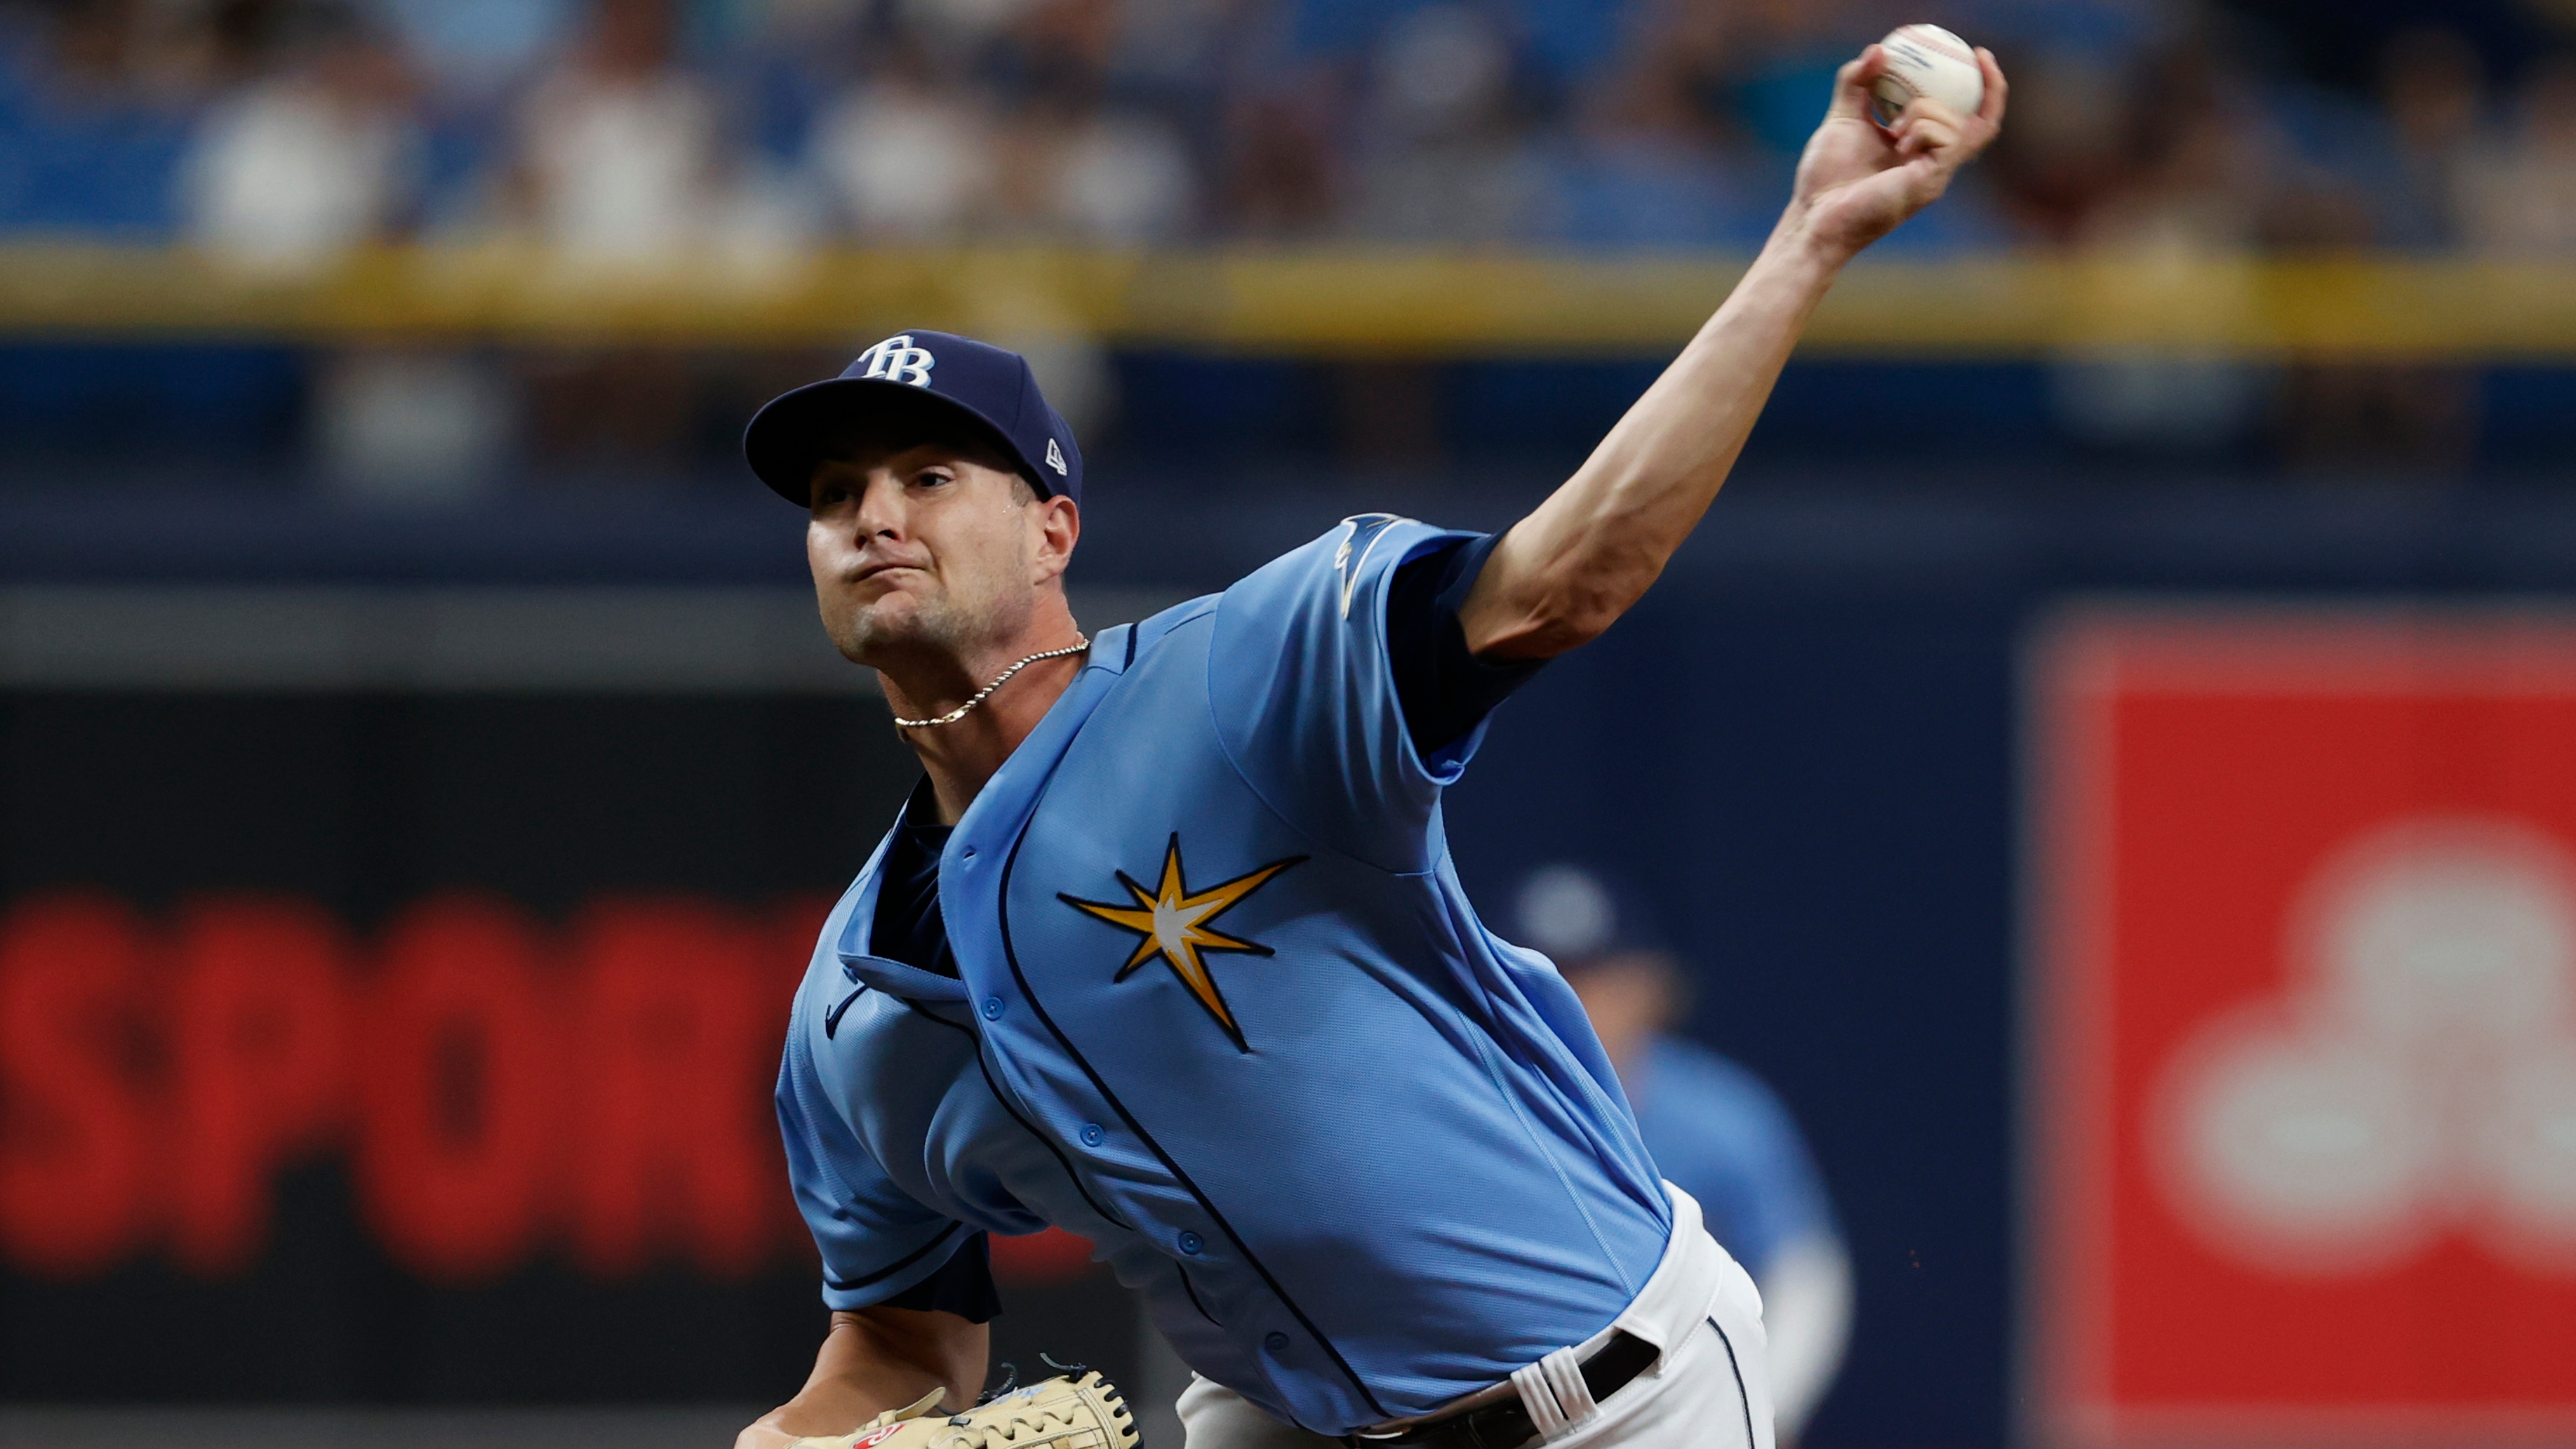 Shane McClanahan adjusts, leads Rays to win over Orioles